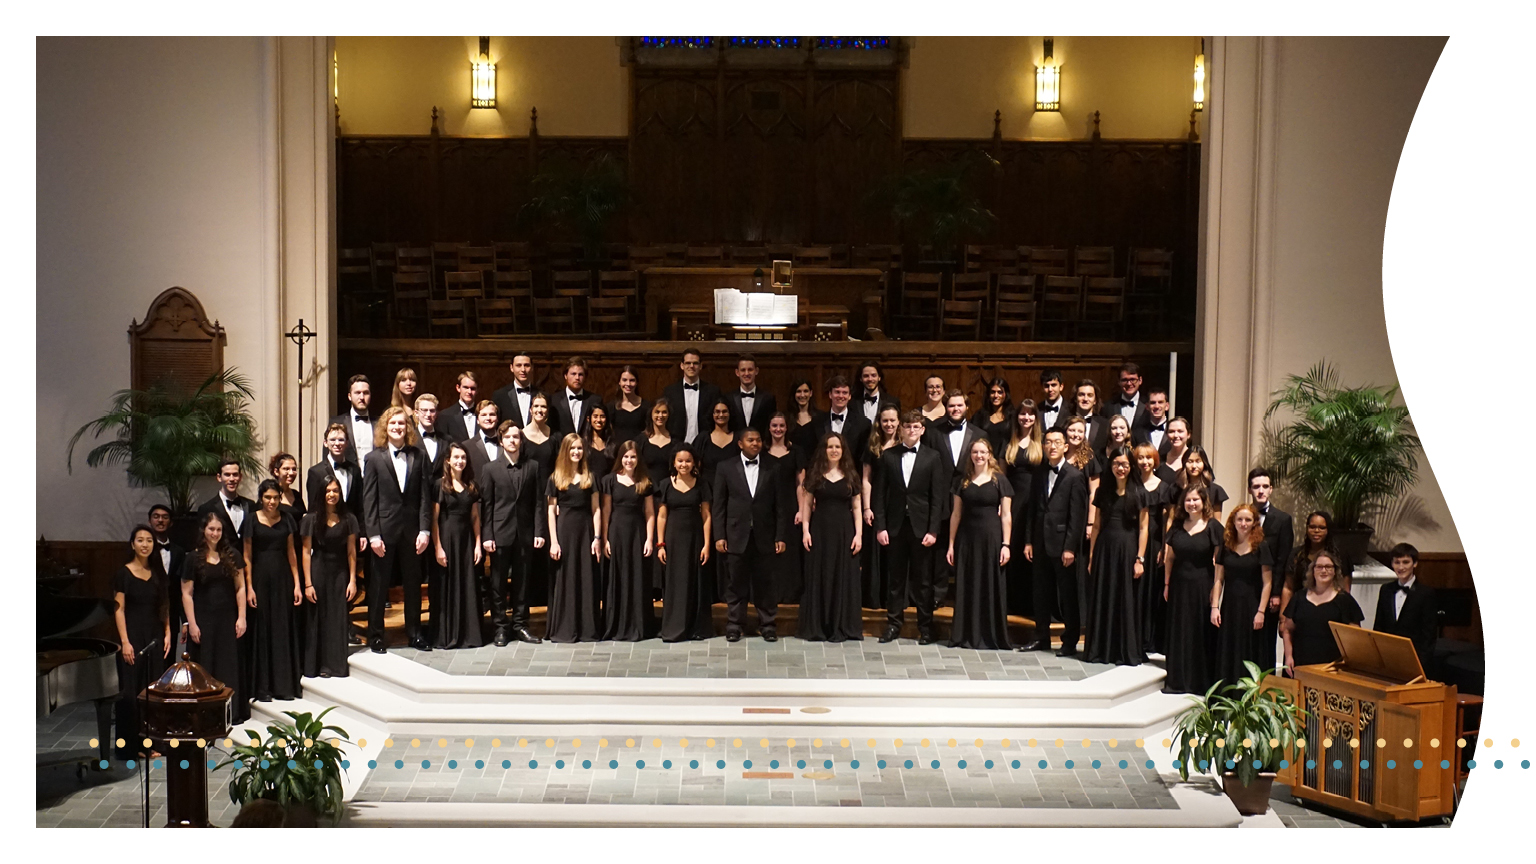  A group picture of the Georgia Tech Chamber Choir in a large auditorium.